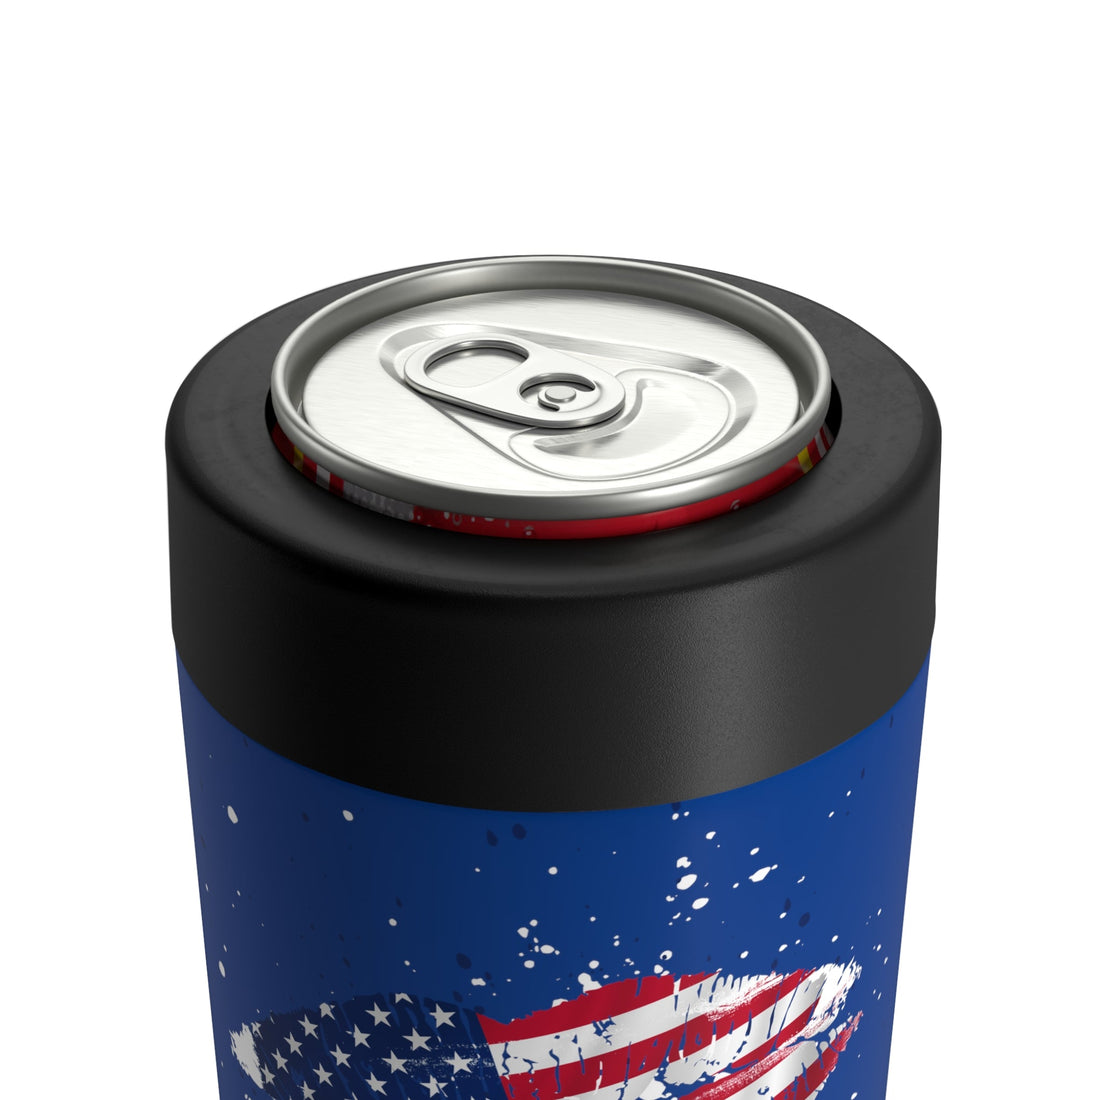 American Kiss This Can Holder - Mug - Positively Sassy - American Kiss This Can Holder